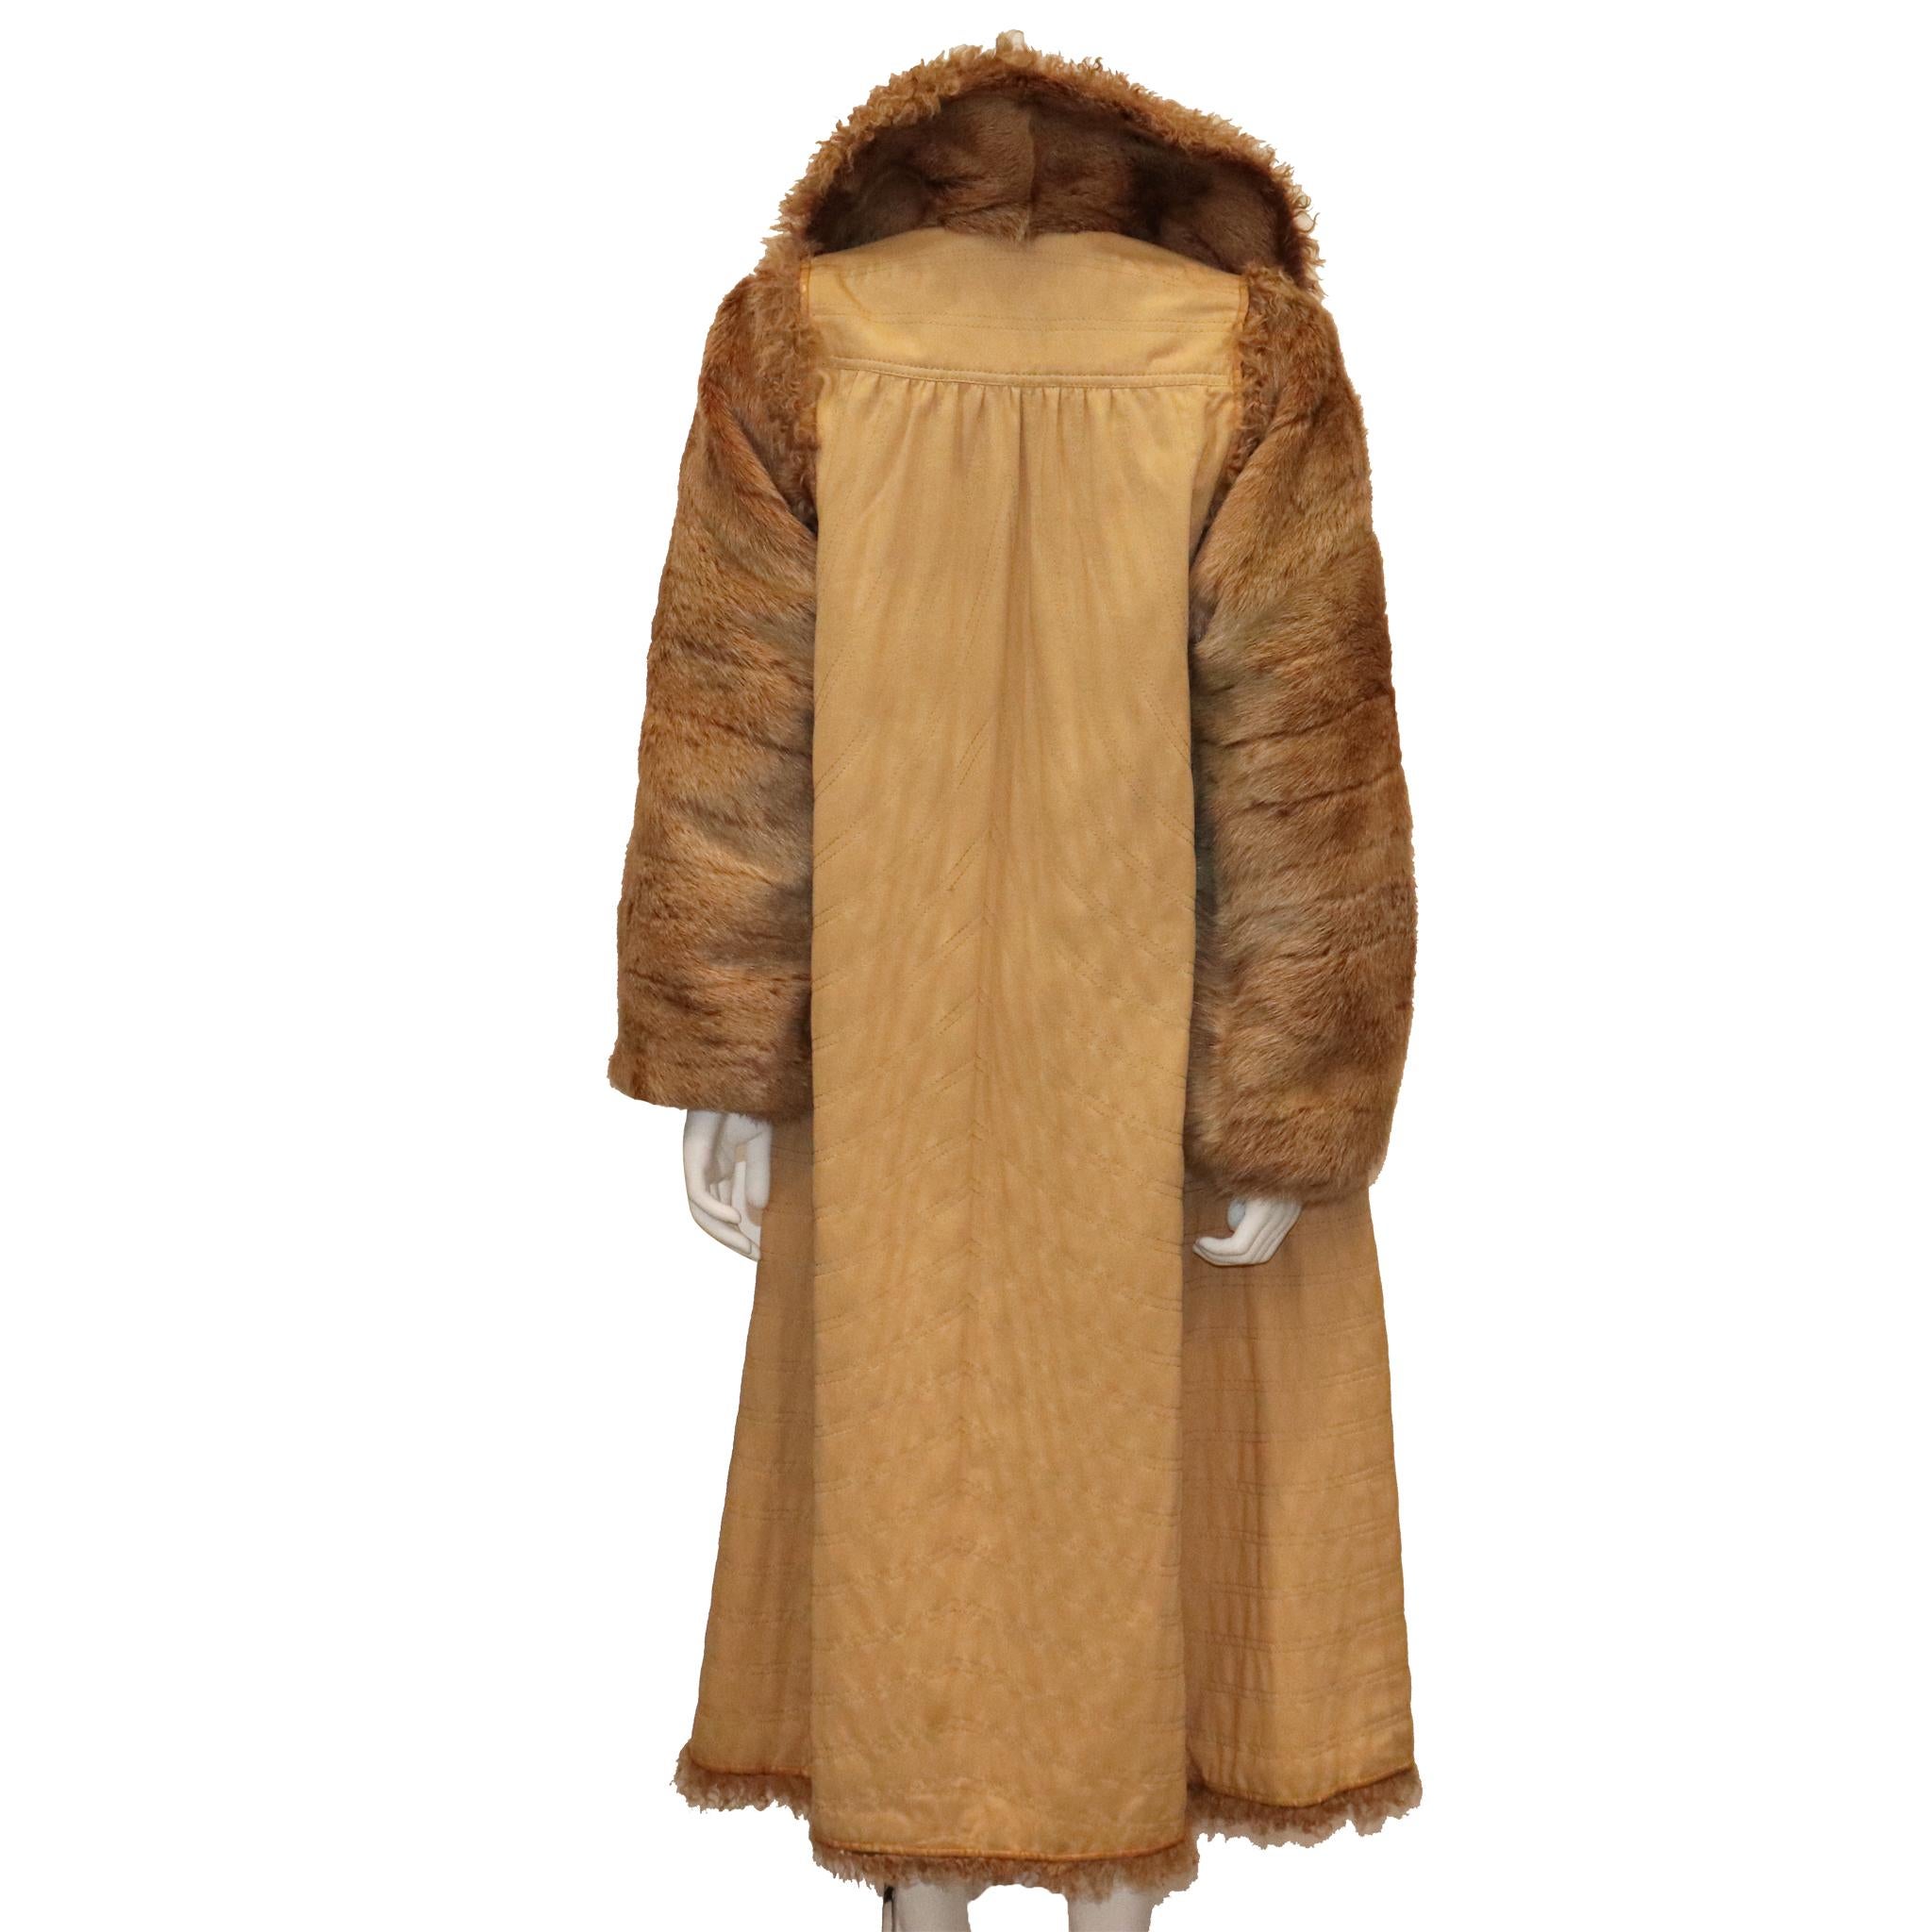 Fendi Reversible Two Piece Marmot and curly Lamb Coat In Excellent Condition For Sale In Los Angeles, CA